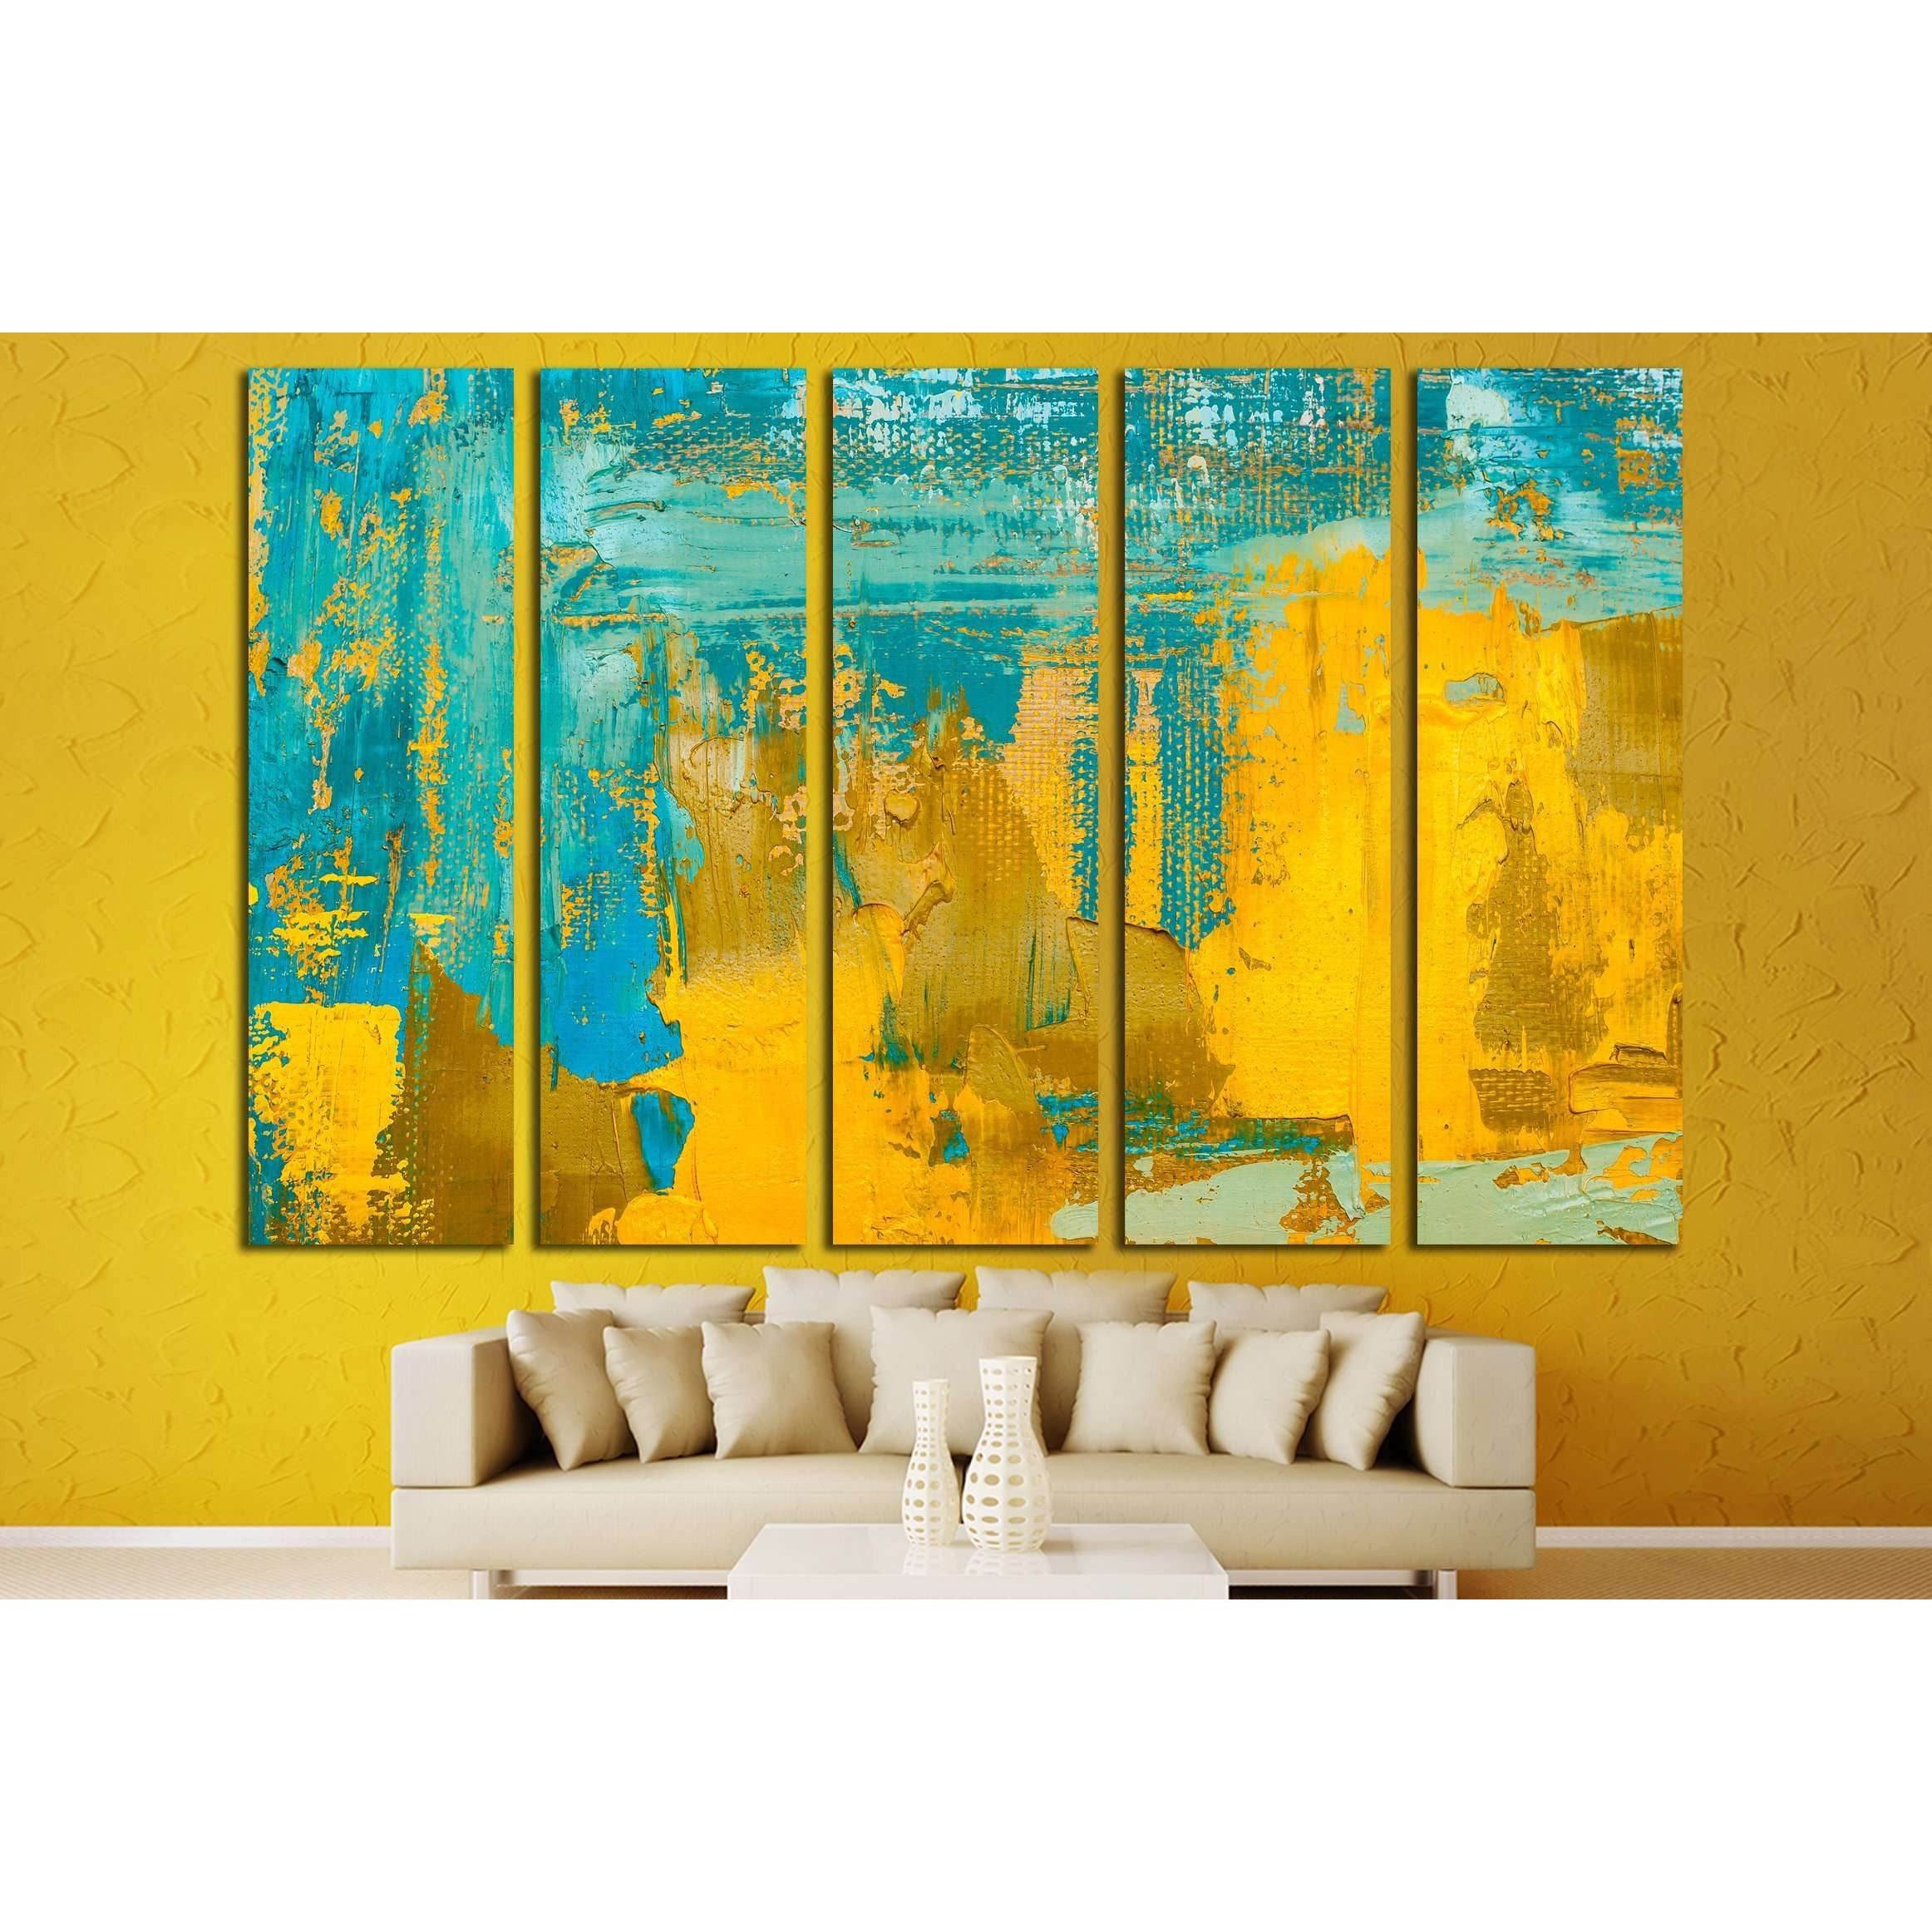 Abstract art background. Oil painting on canvas №3227 Ready to Hang Canvas Print